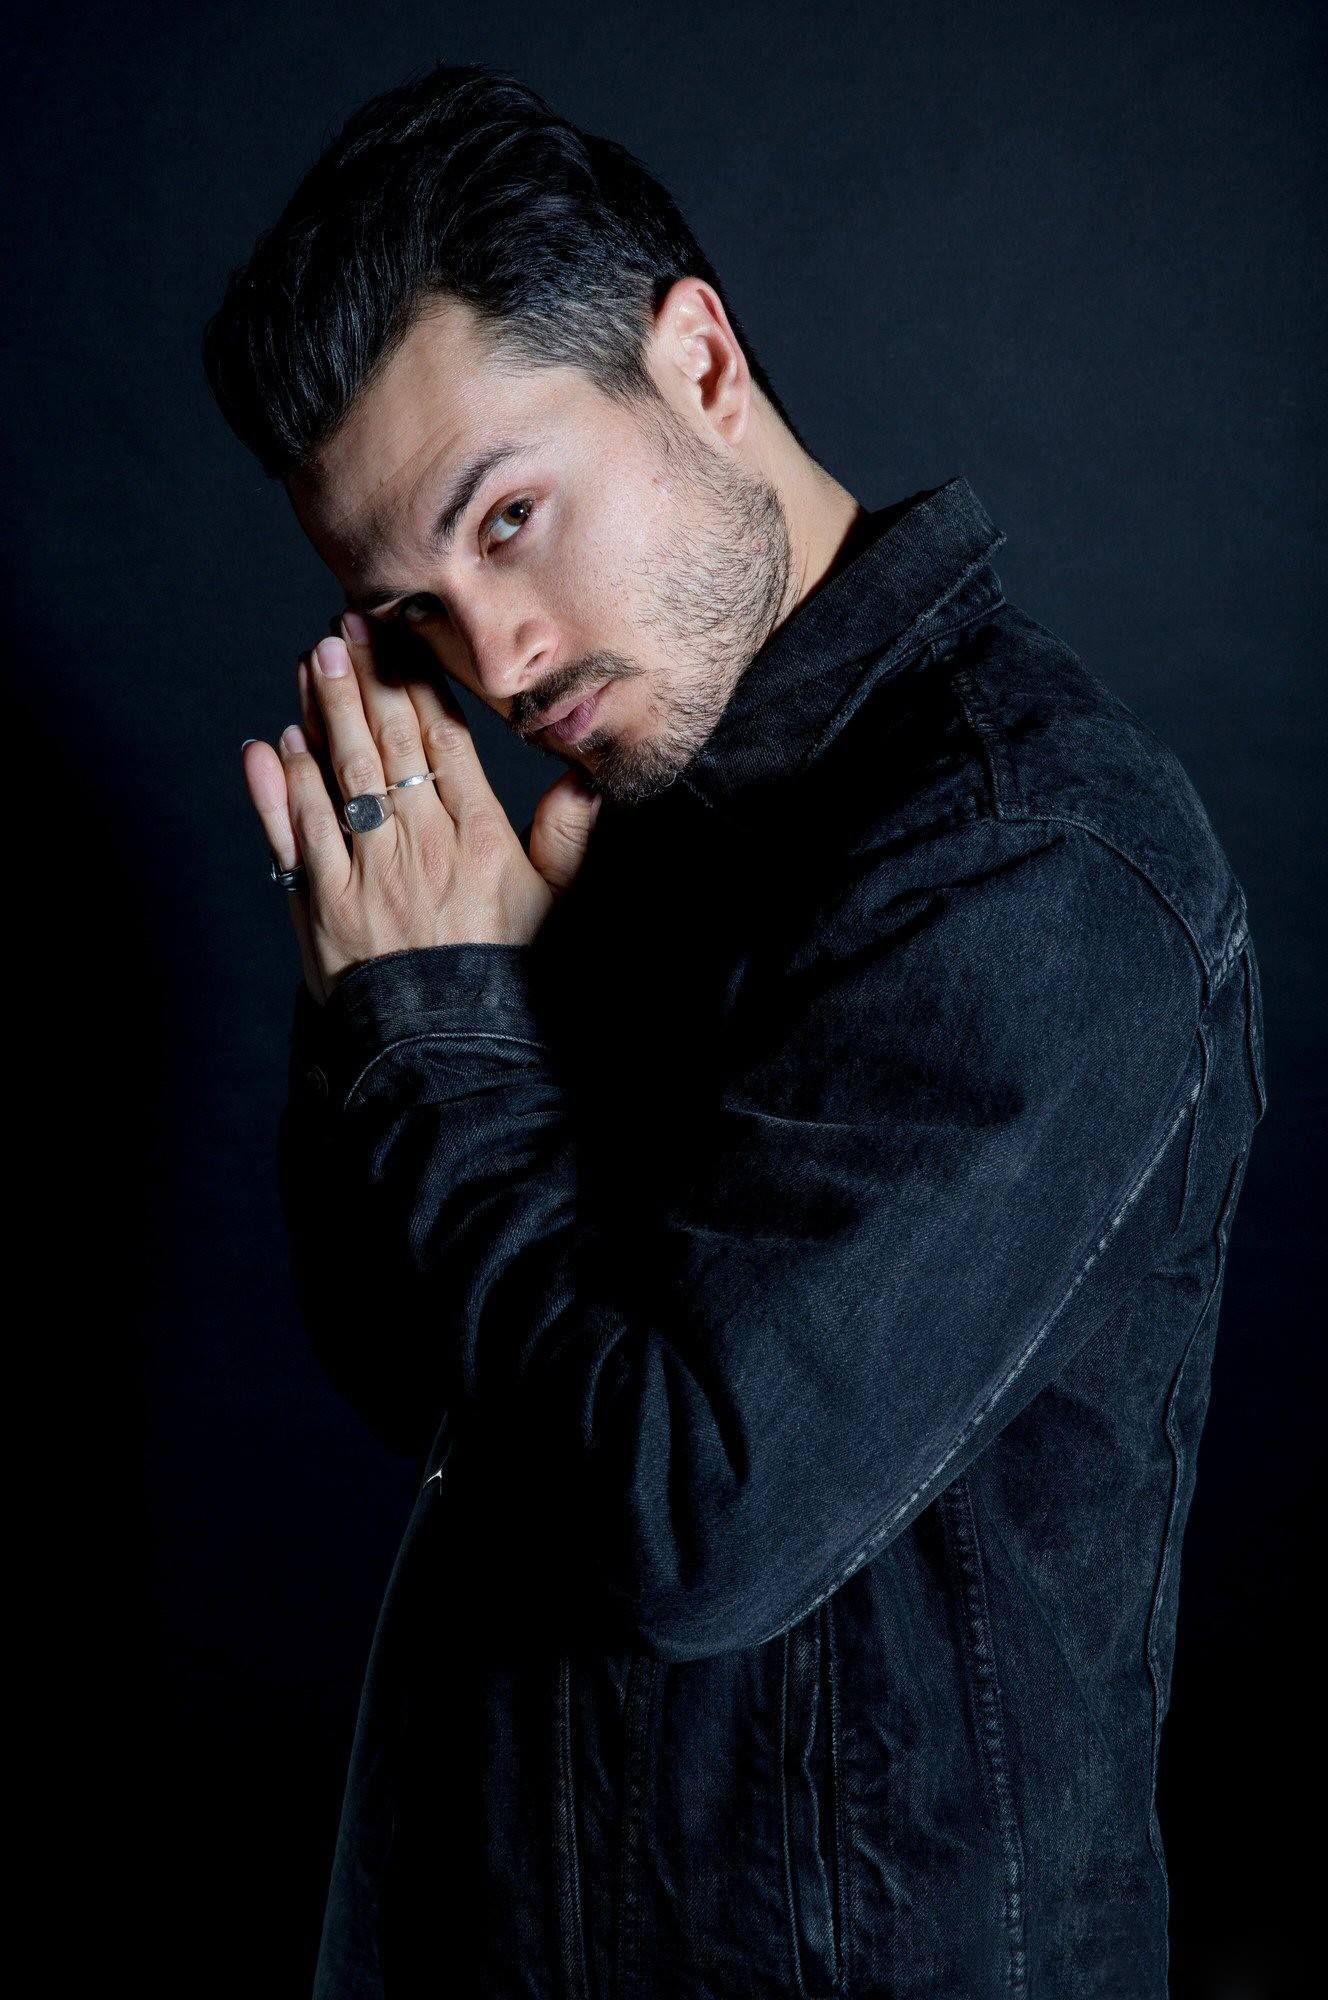 Michael Malarkey. Michael malarkey, Micheal malarkey, Project blue book